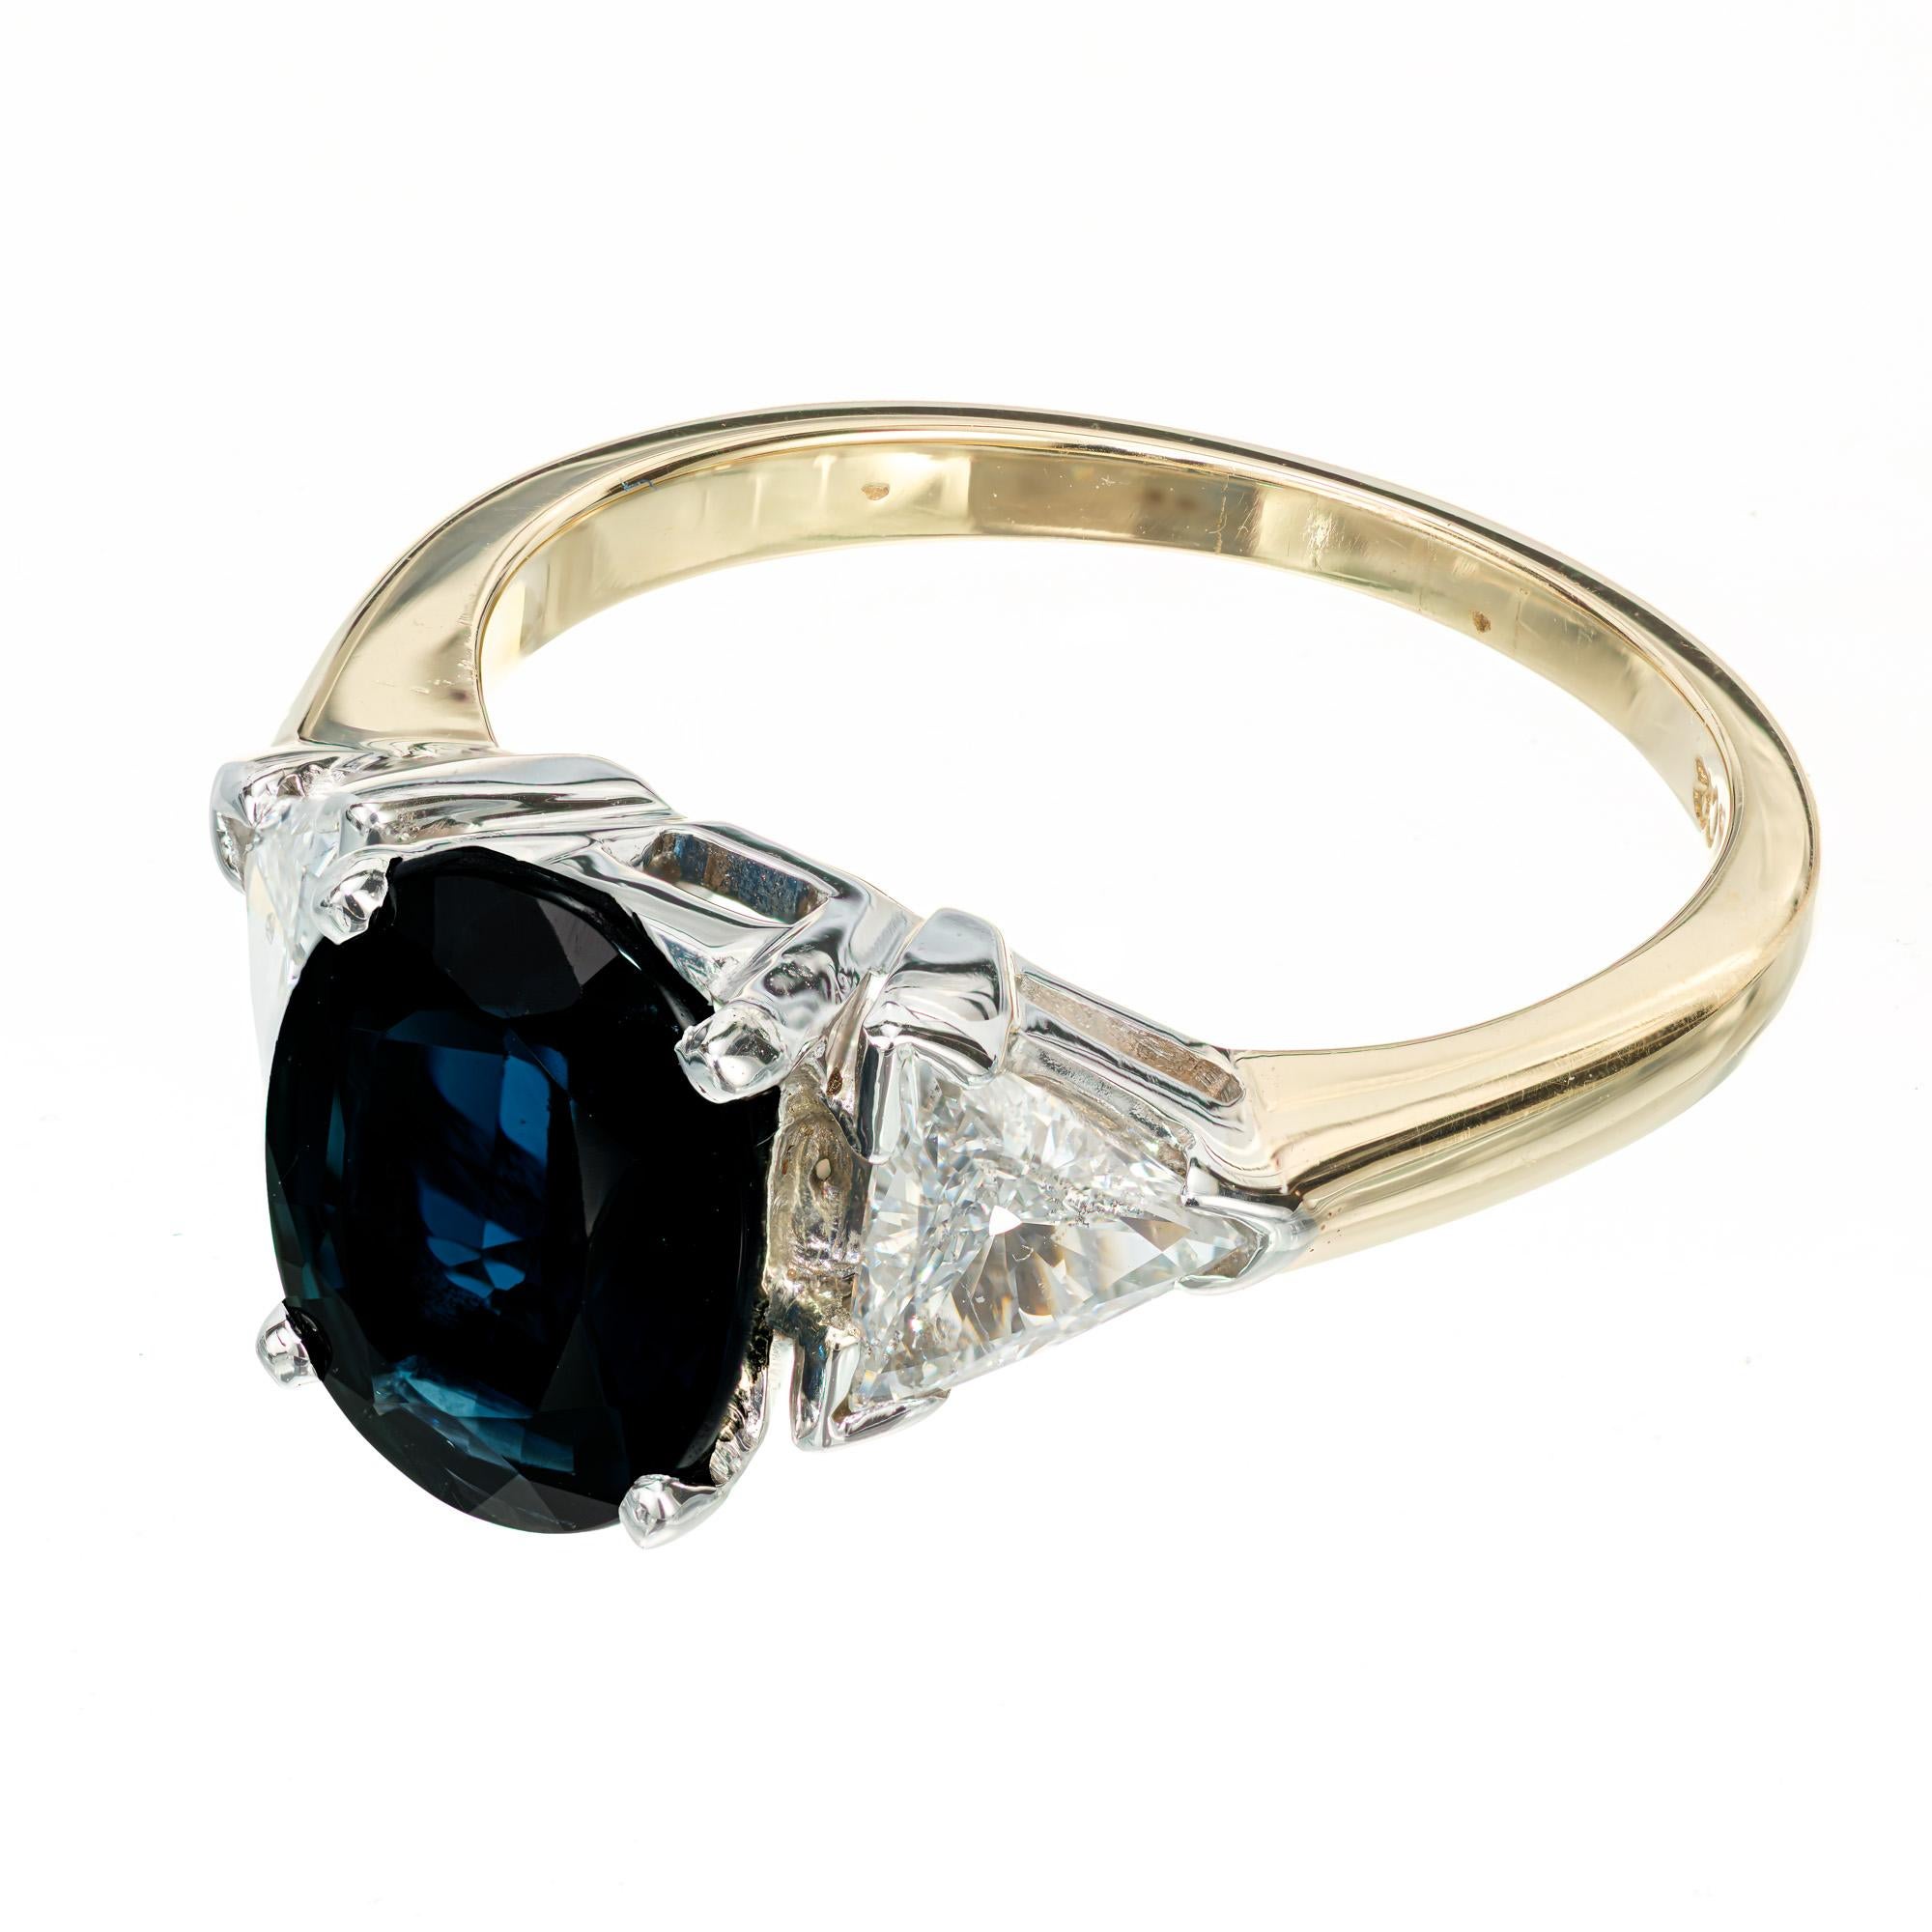 GIA 2.53 Carat Royal Blue Sapphire Diamond Yellow White Gold Engagement Ring In Good Condition For Sale In Stamford, CT